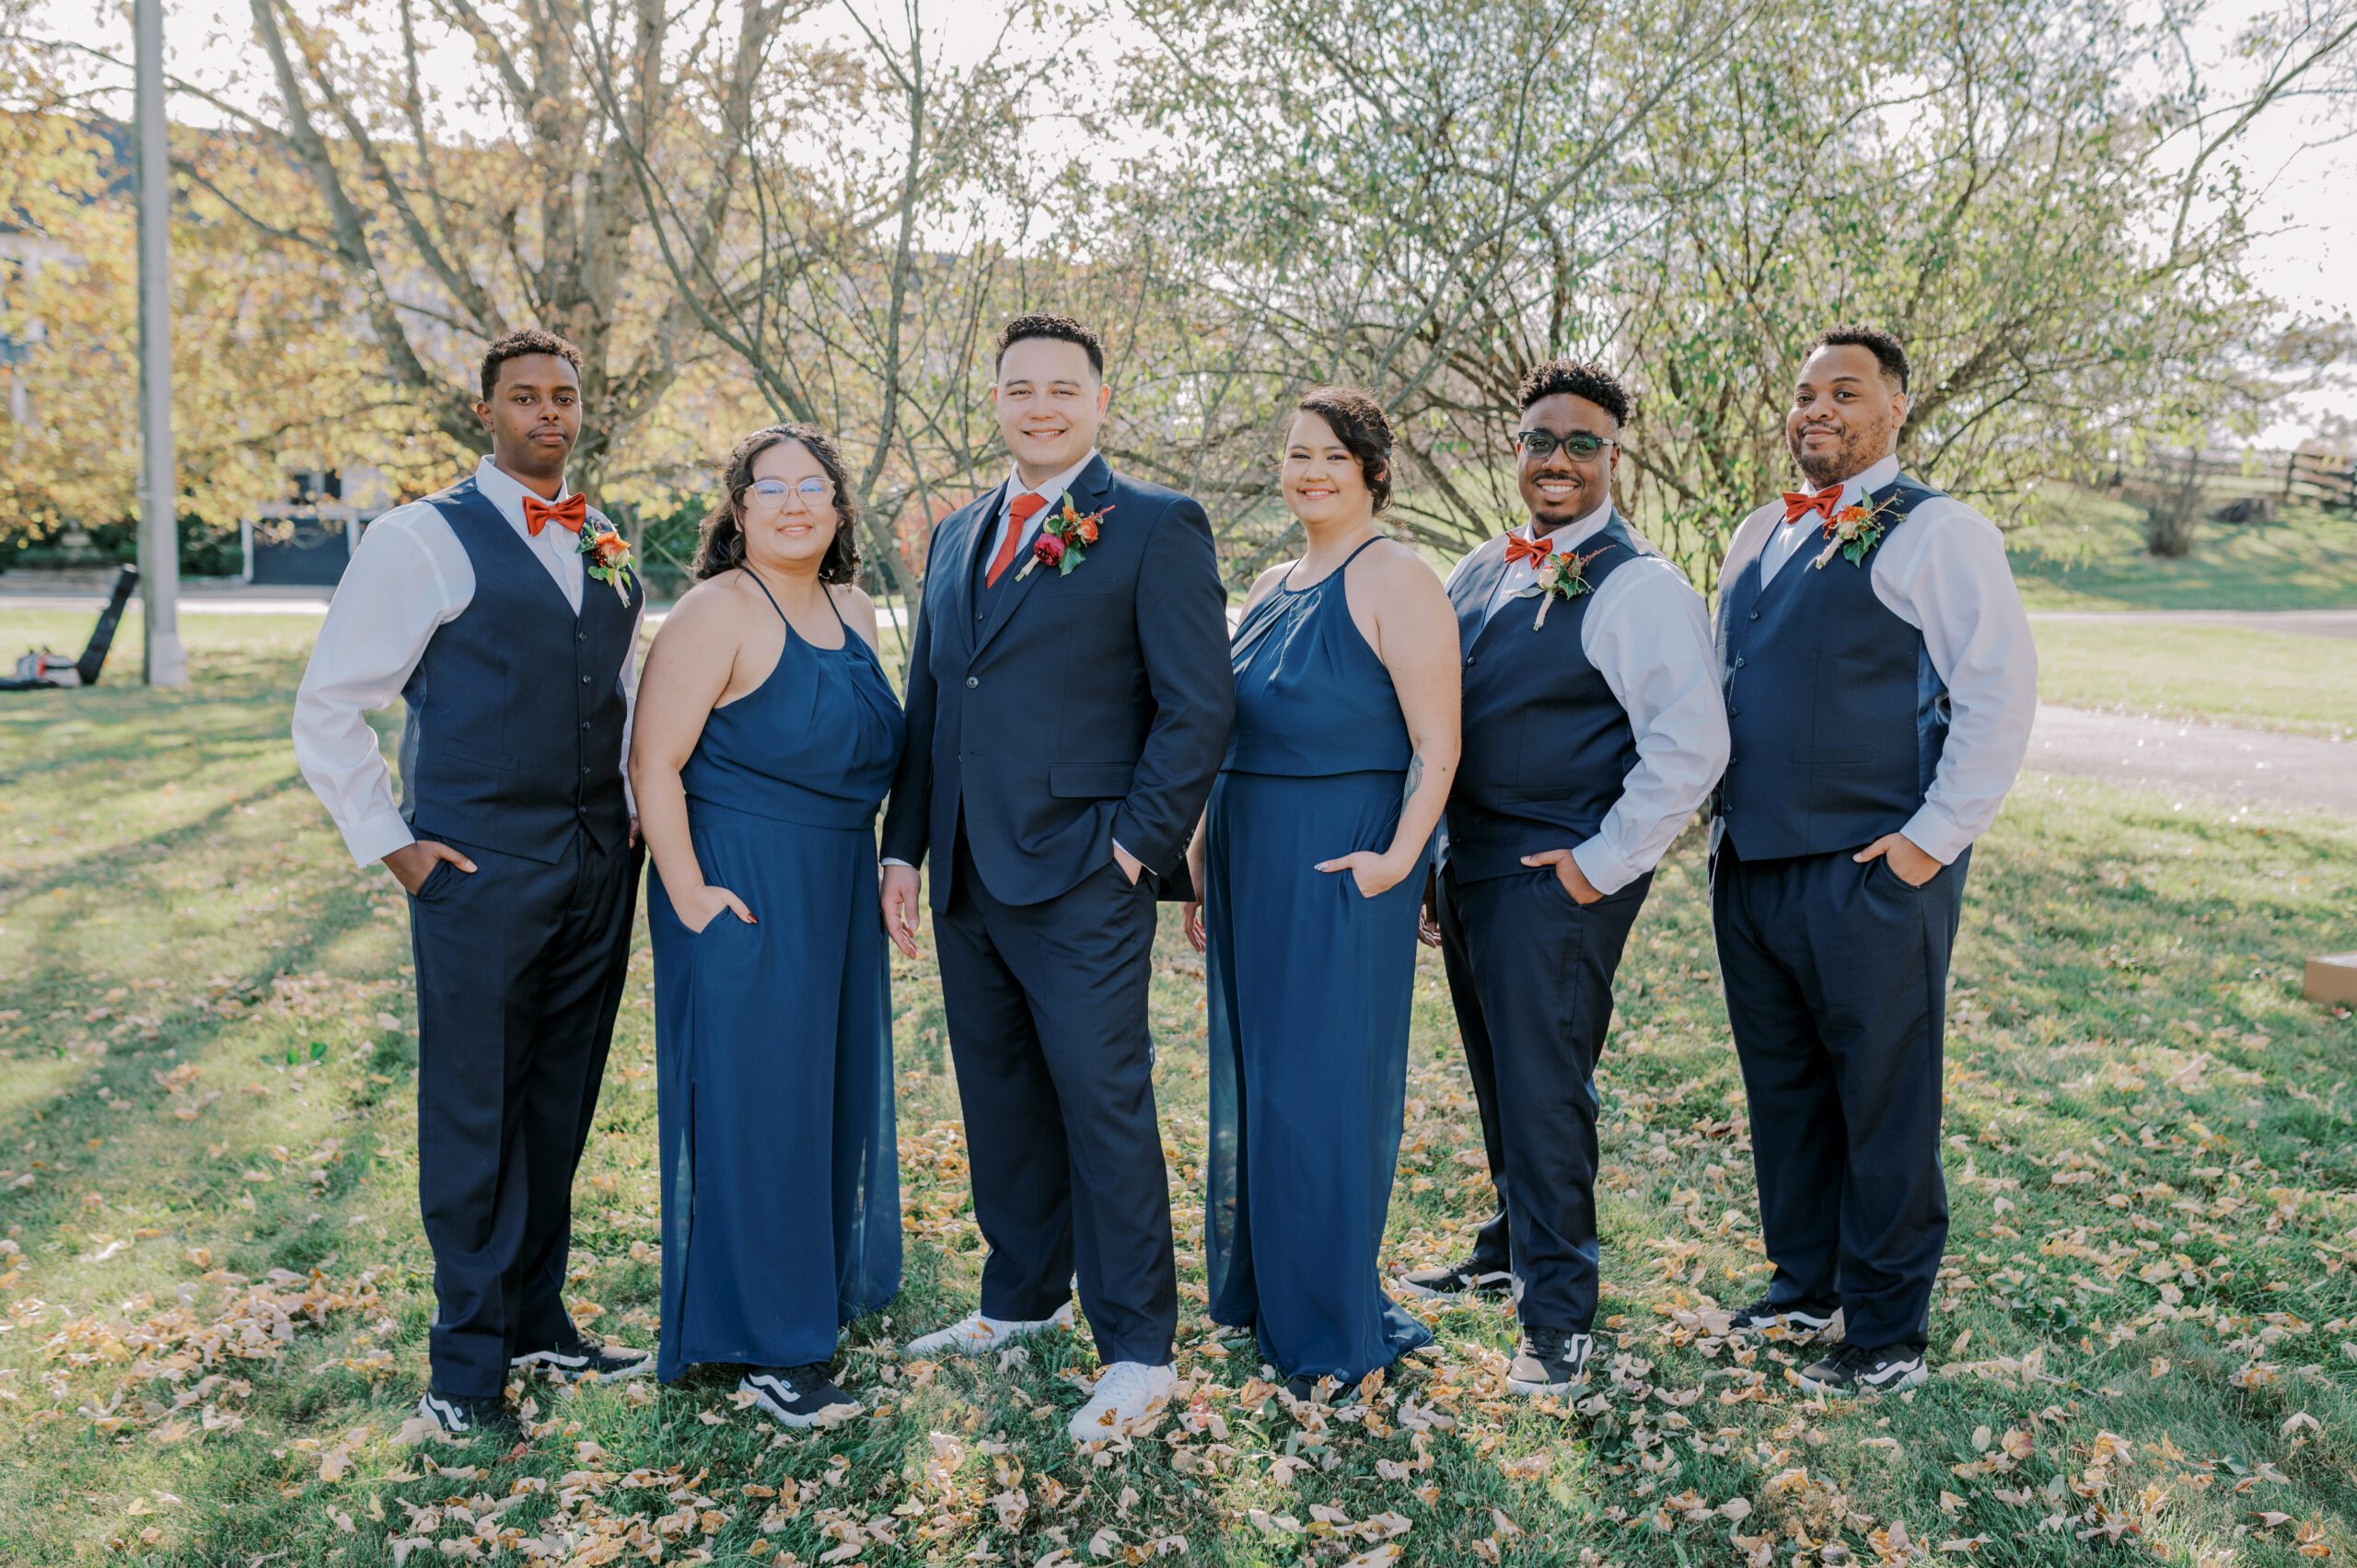 Groom and his wedding party members, three men in suits and two women in blue jumpsuits